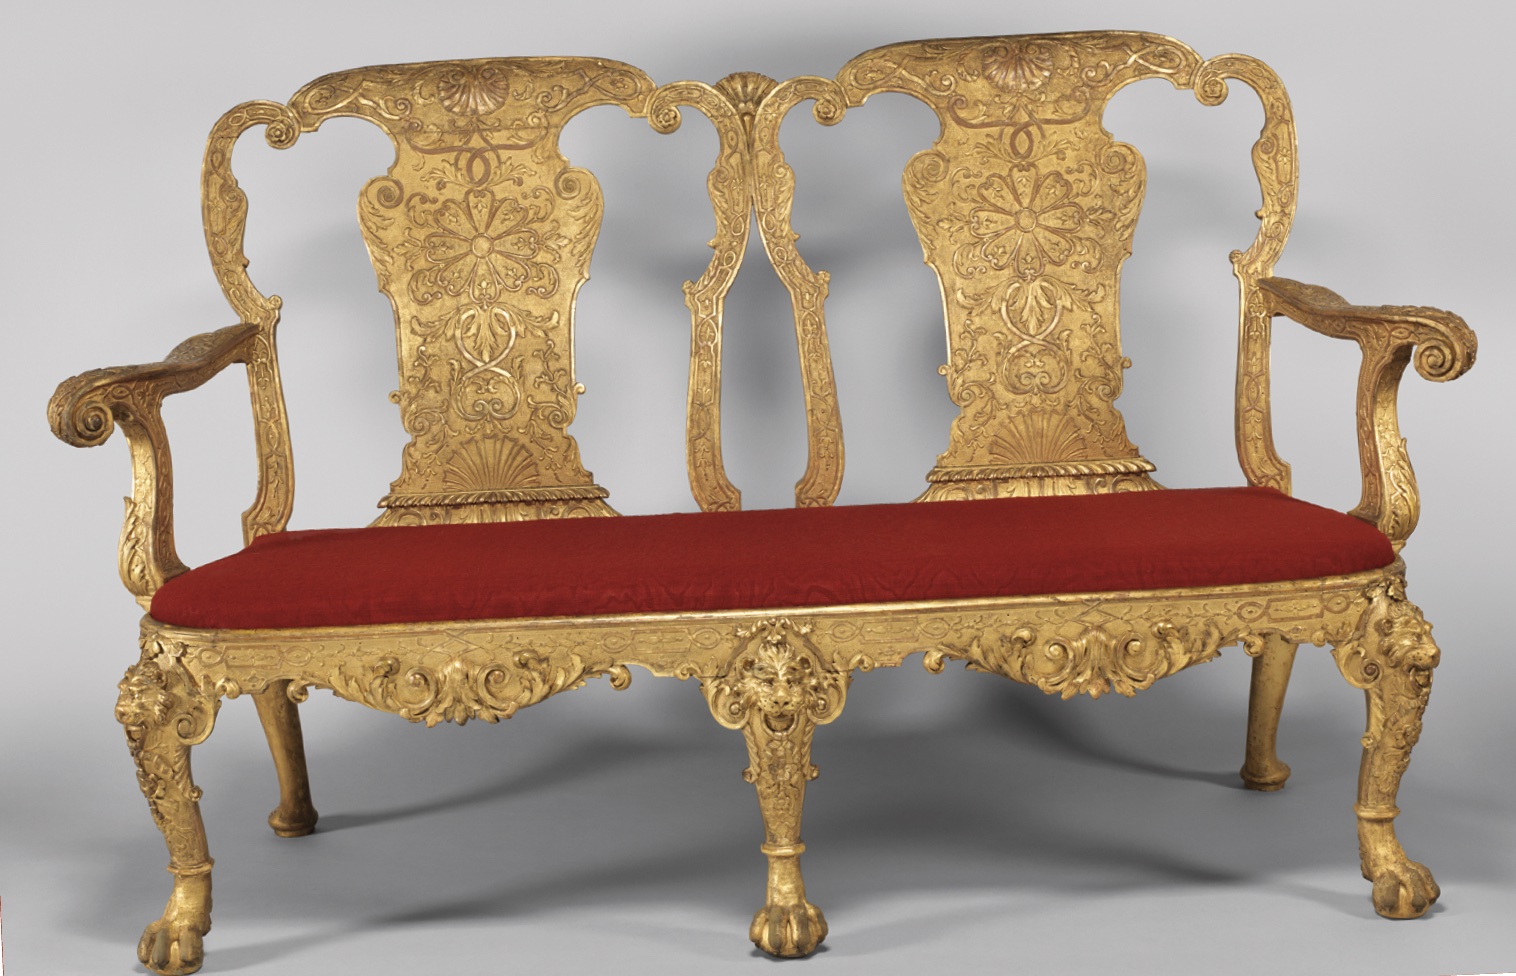 Settee, possibly made by Benjamin Goodison British, c. 1730